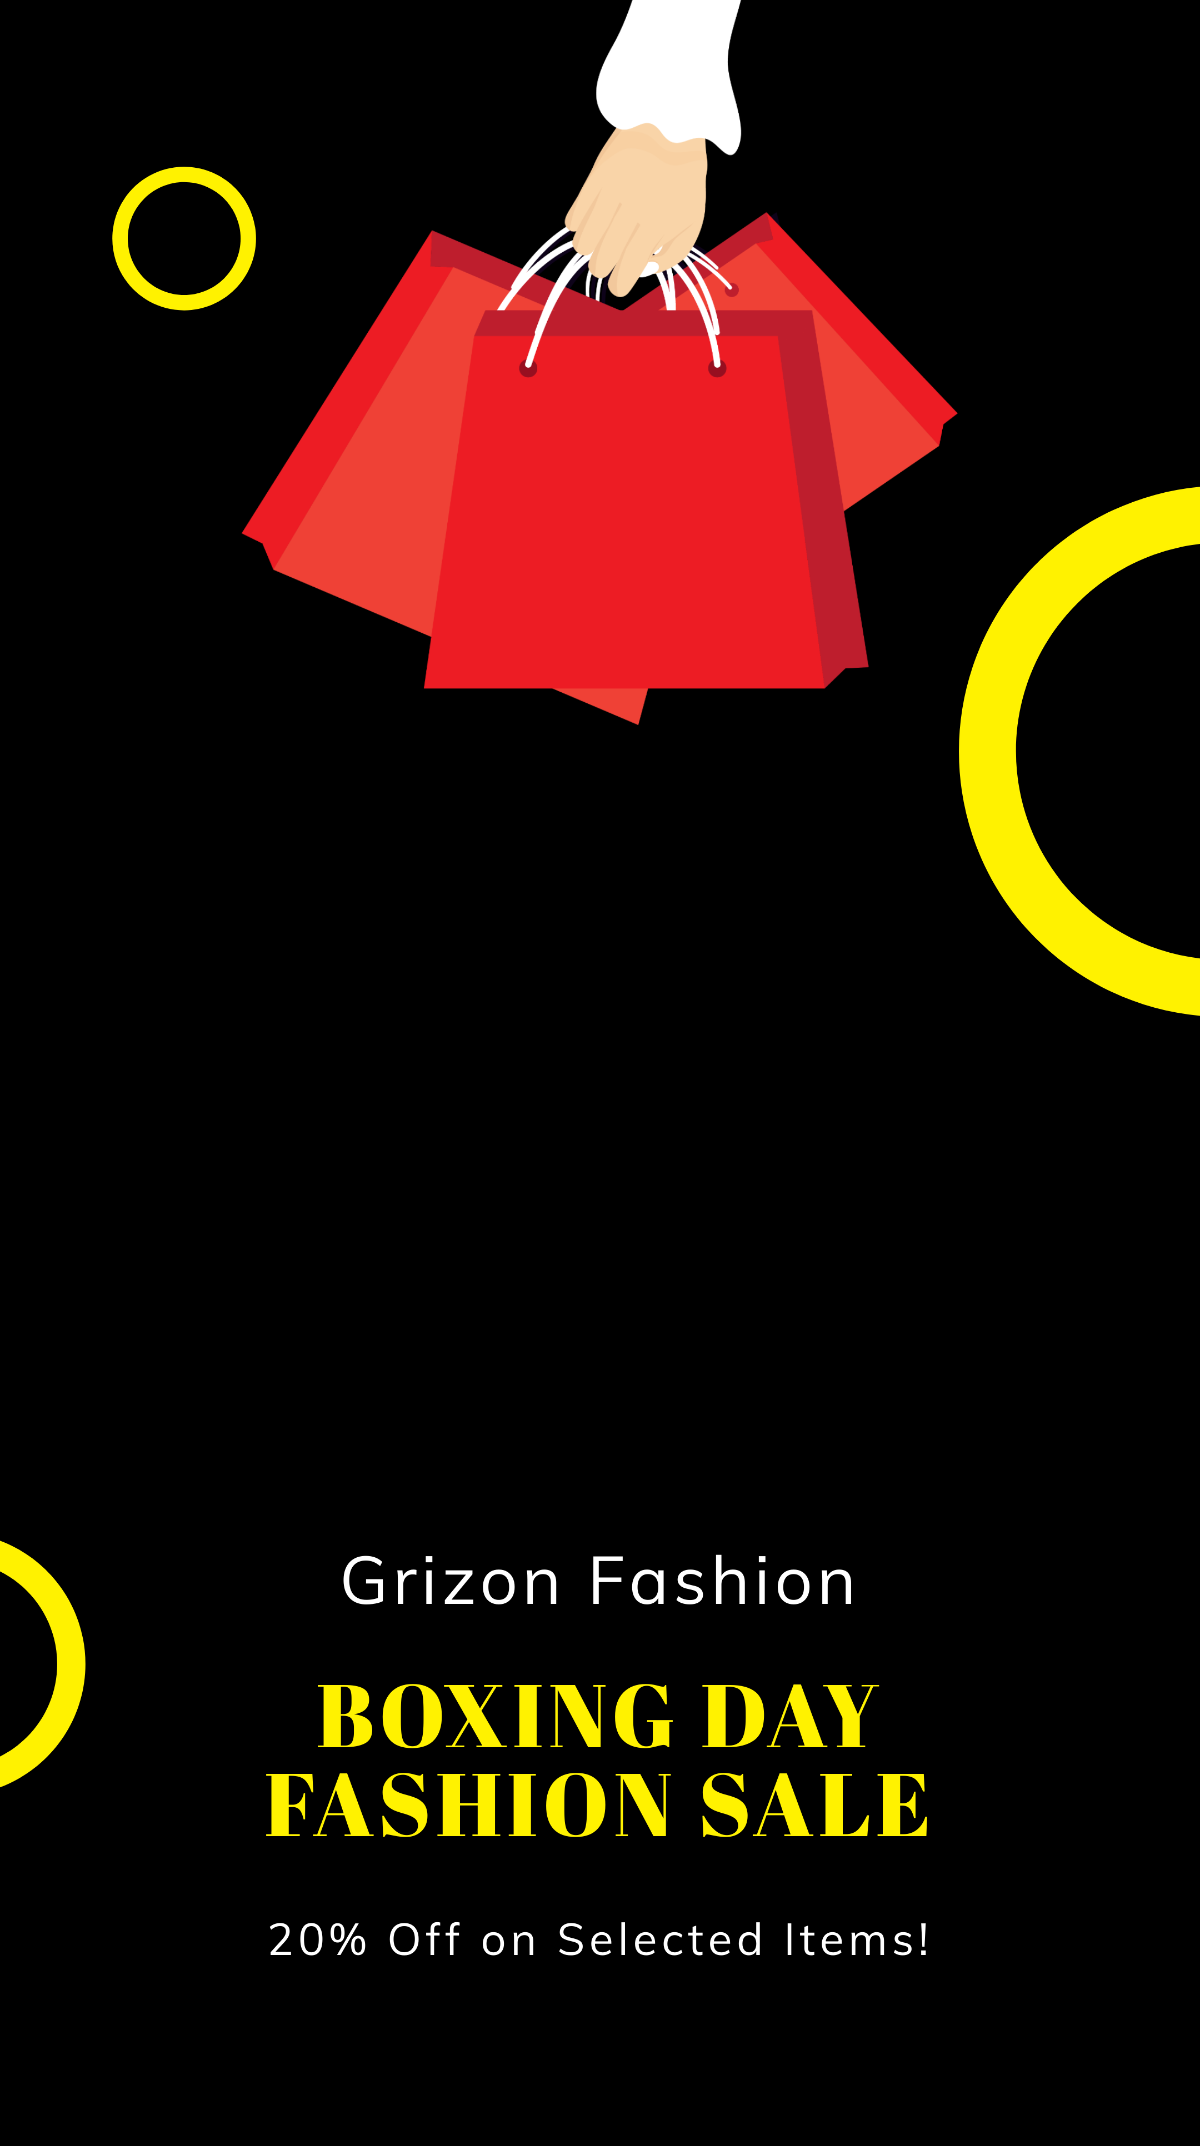 Free Boxing Day Fashion Sale Snapchat Geofilter Template